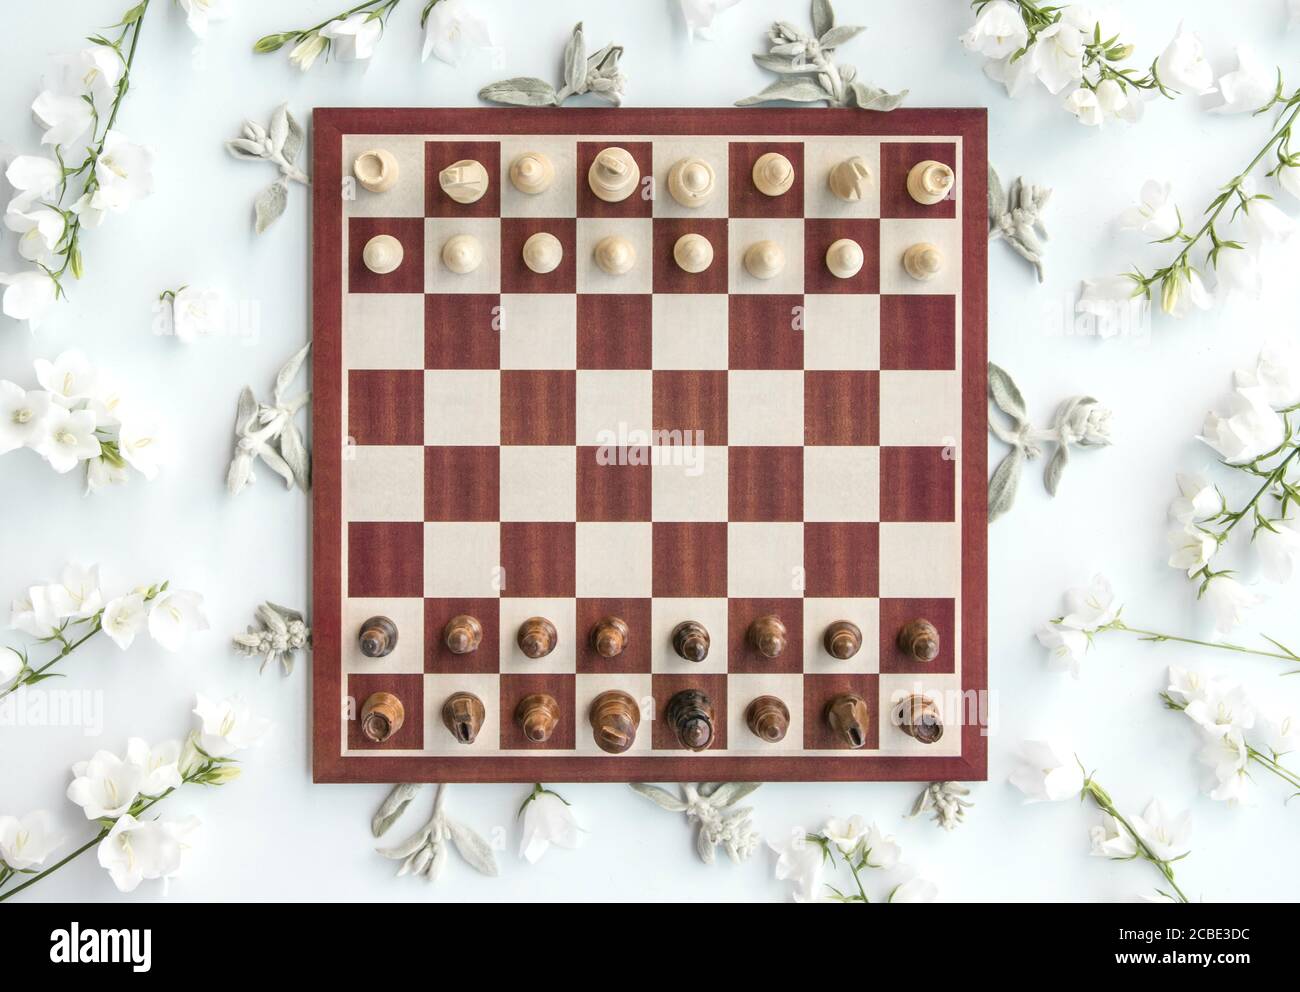 Chess game-opening - first move with a white pawn 21509829 Stock Photo at  Vecteezy